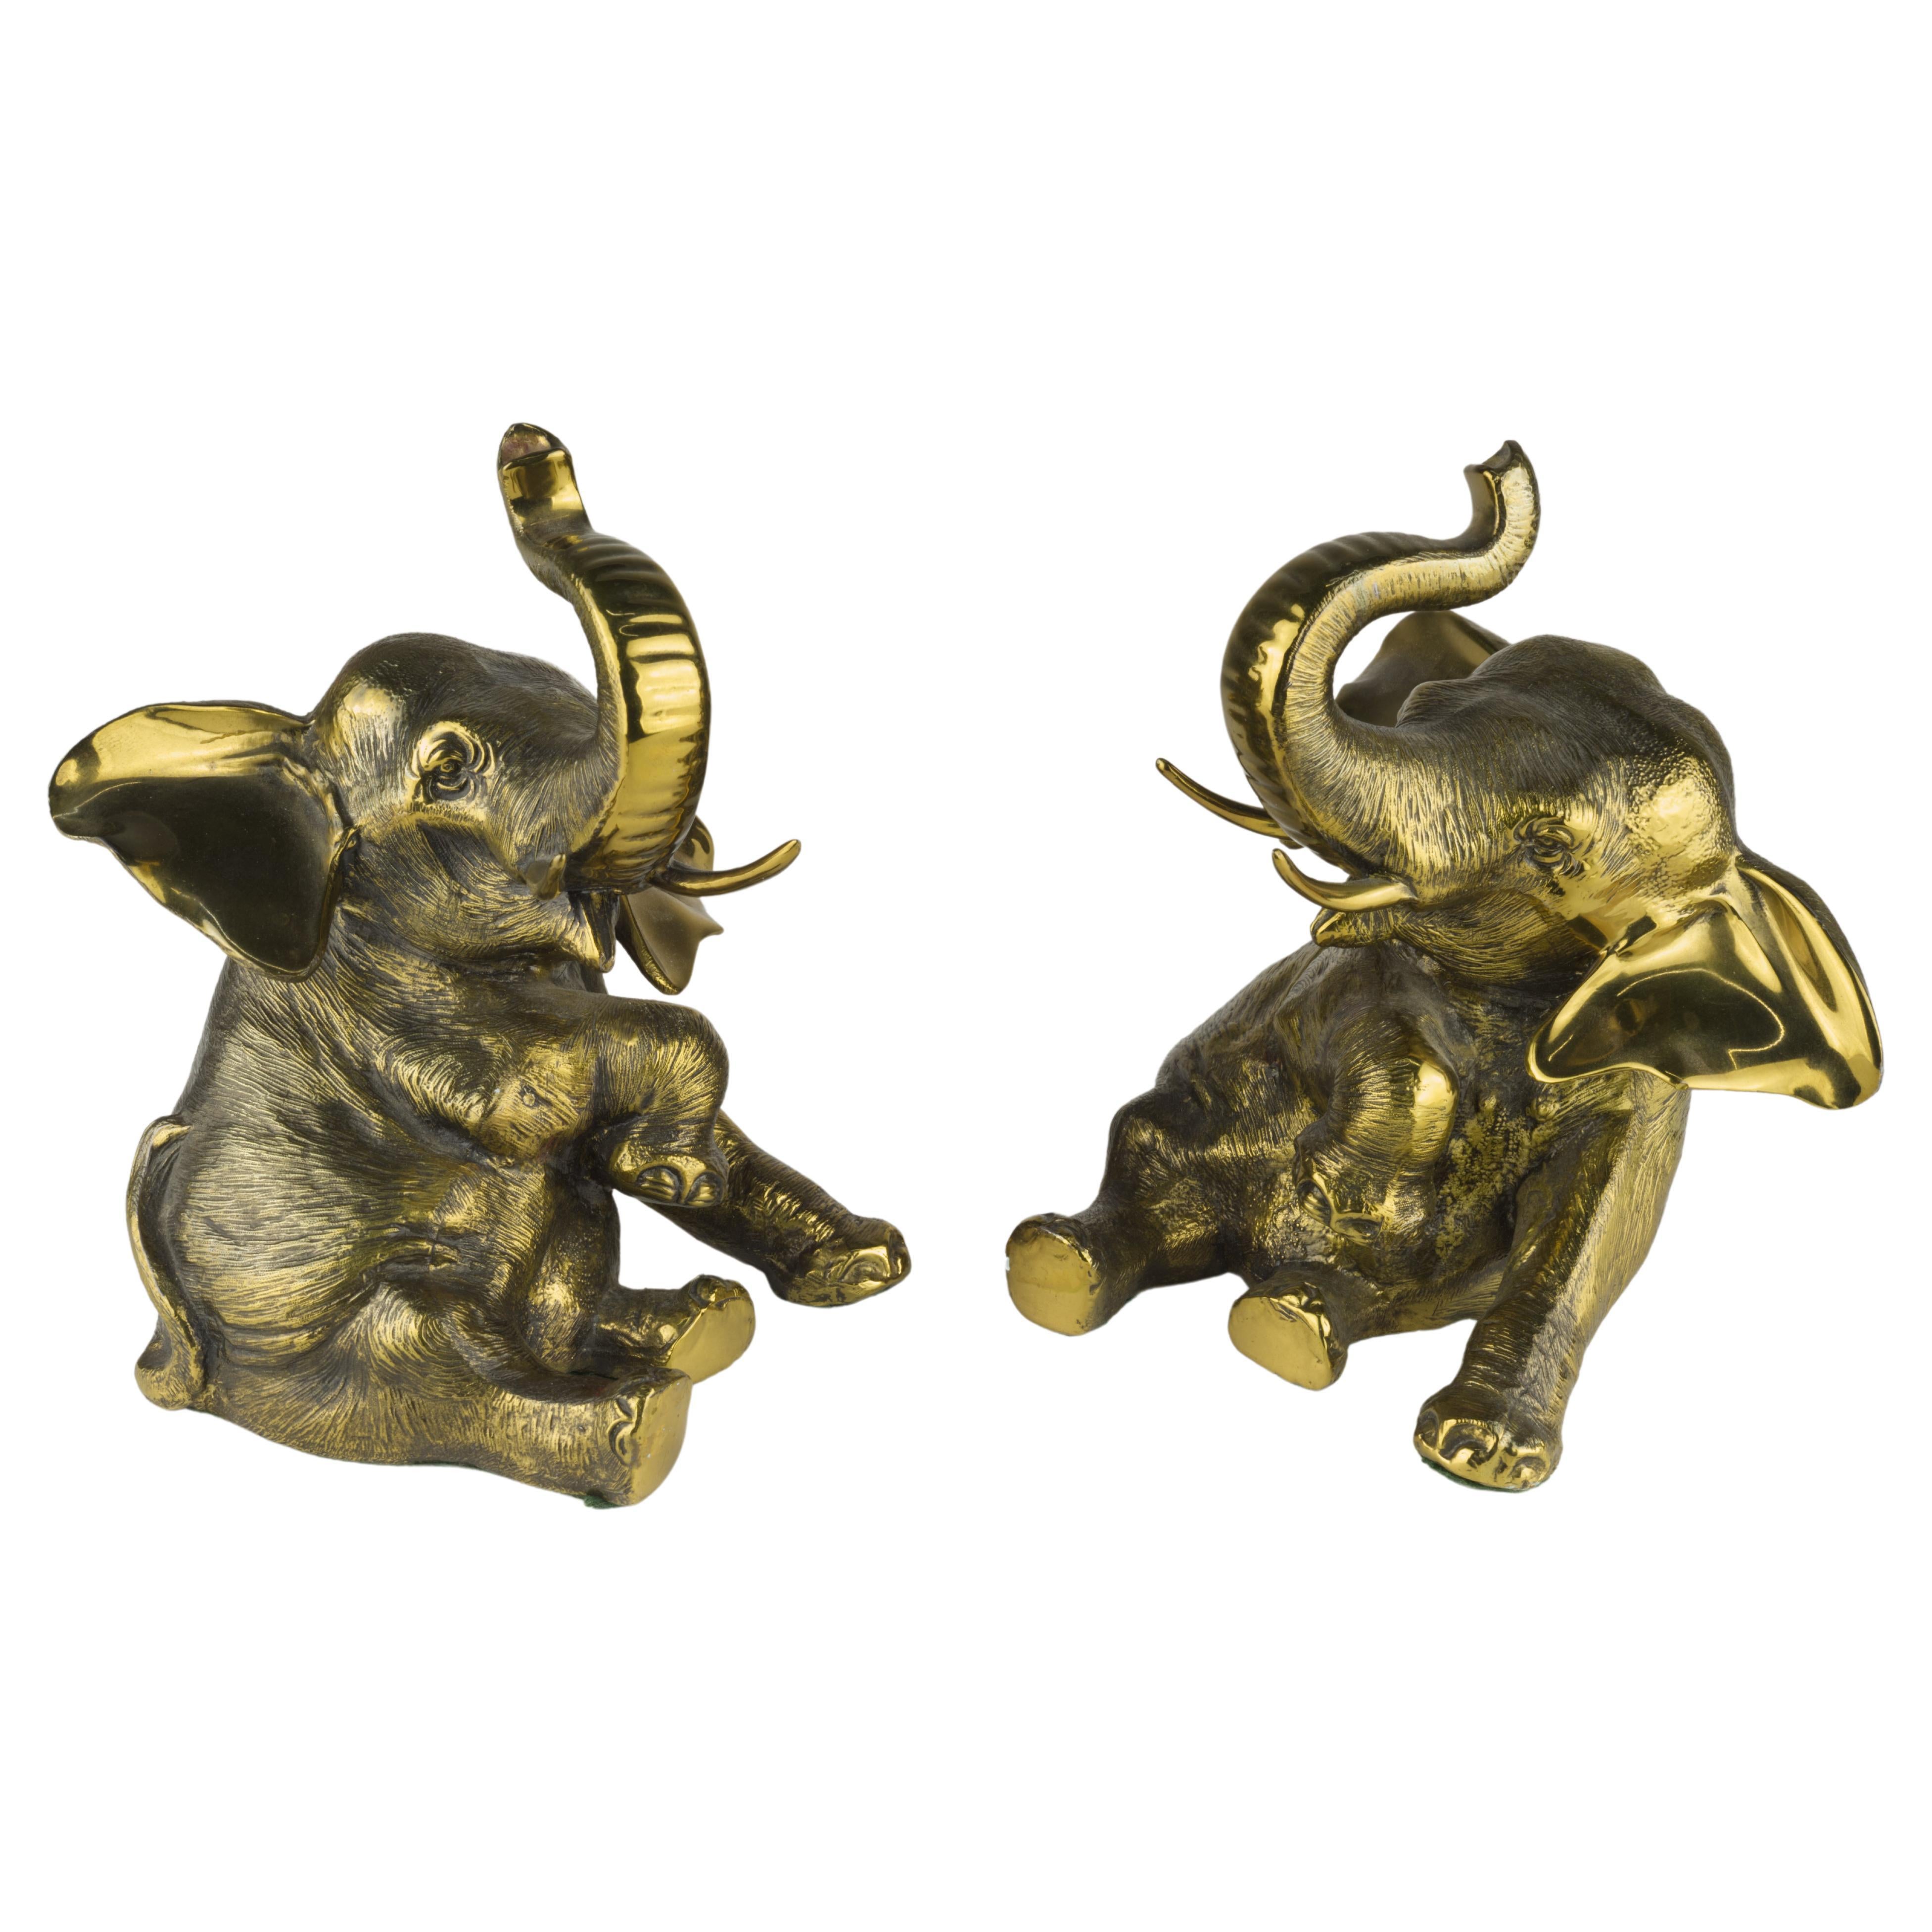 Jennings Brothers Pair of Bronze Elephant Bookends